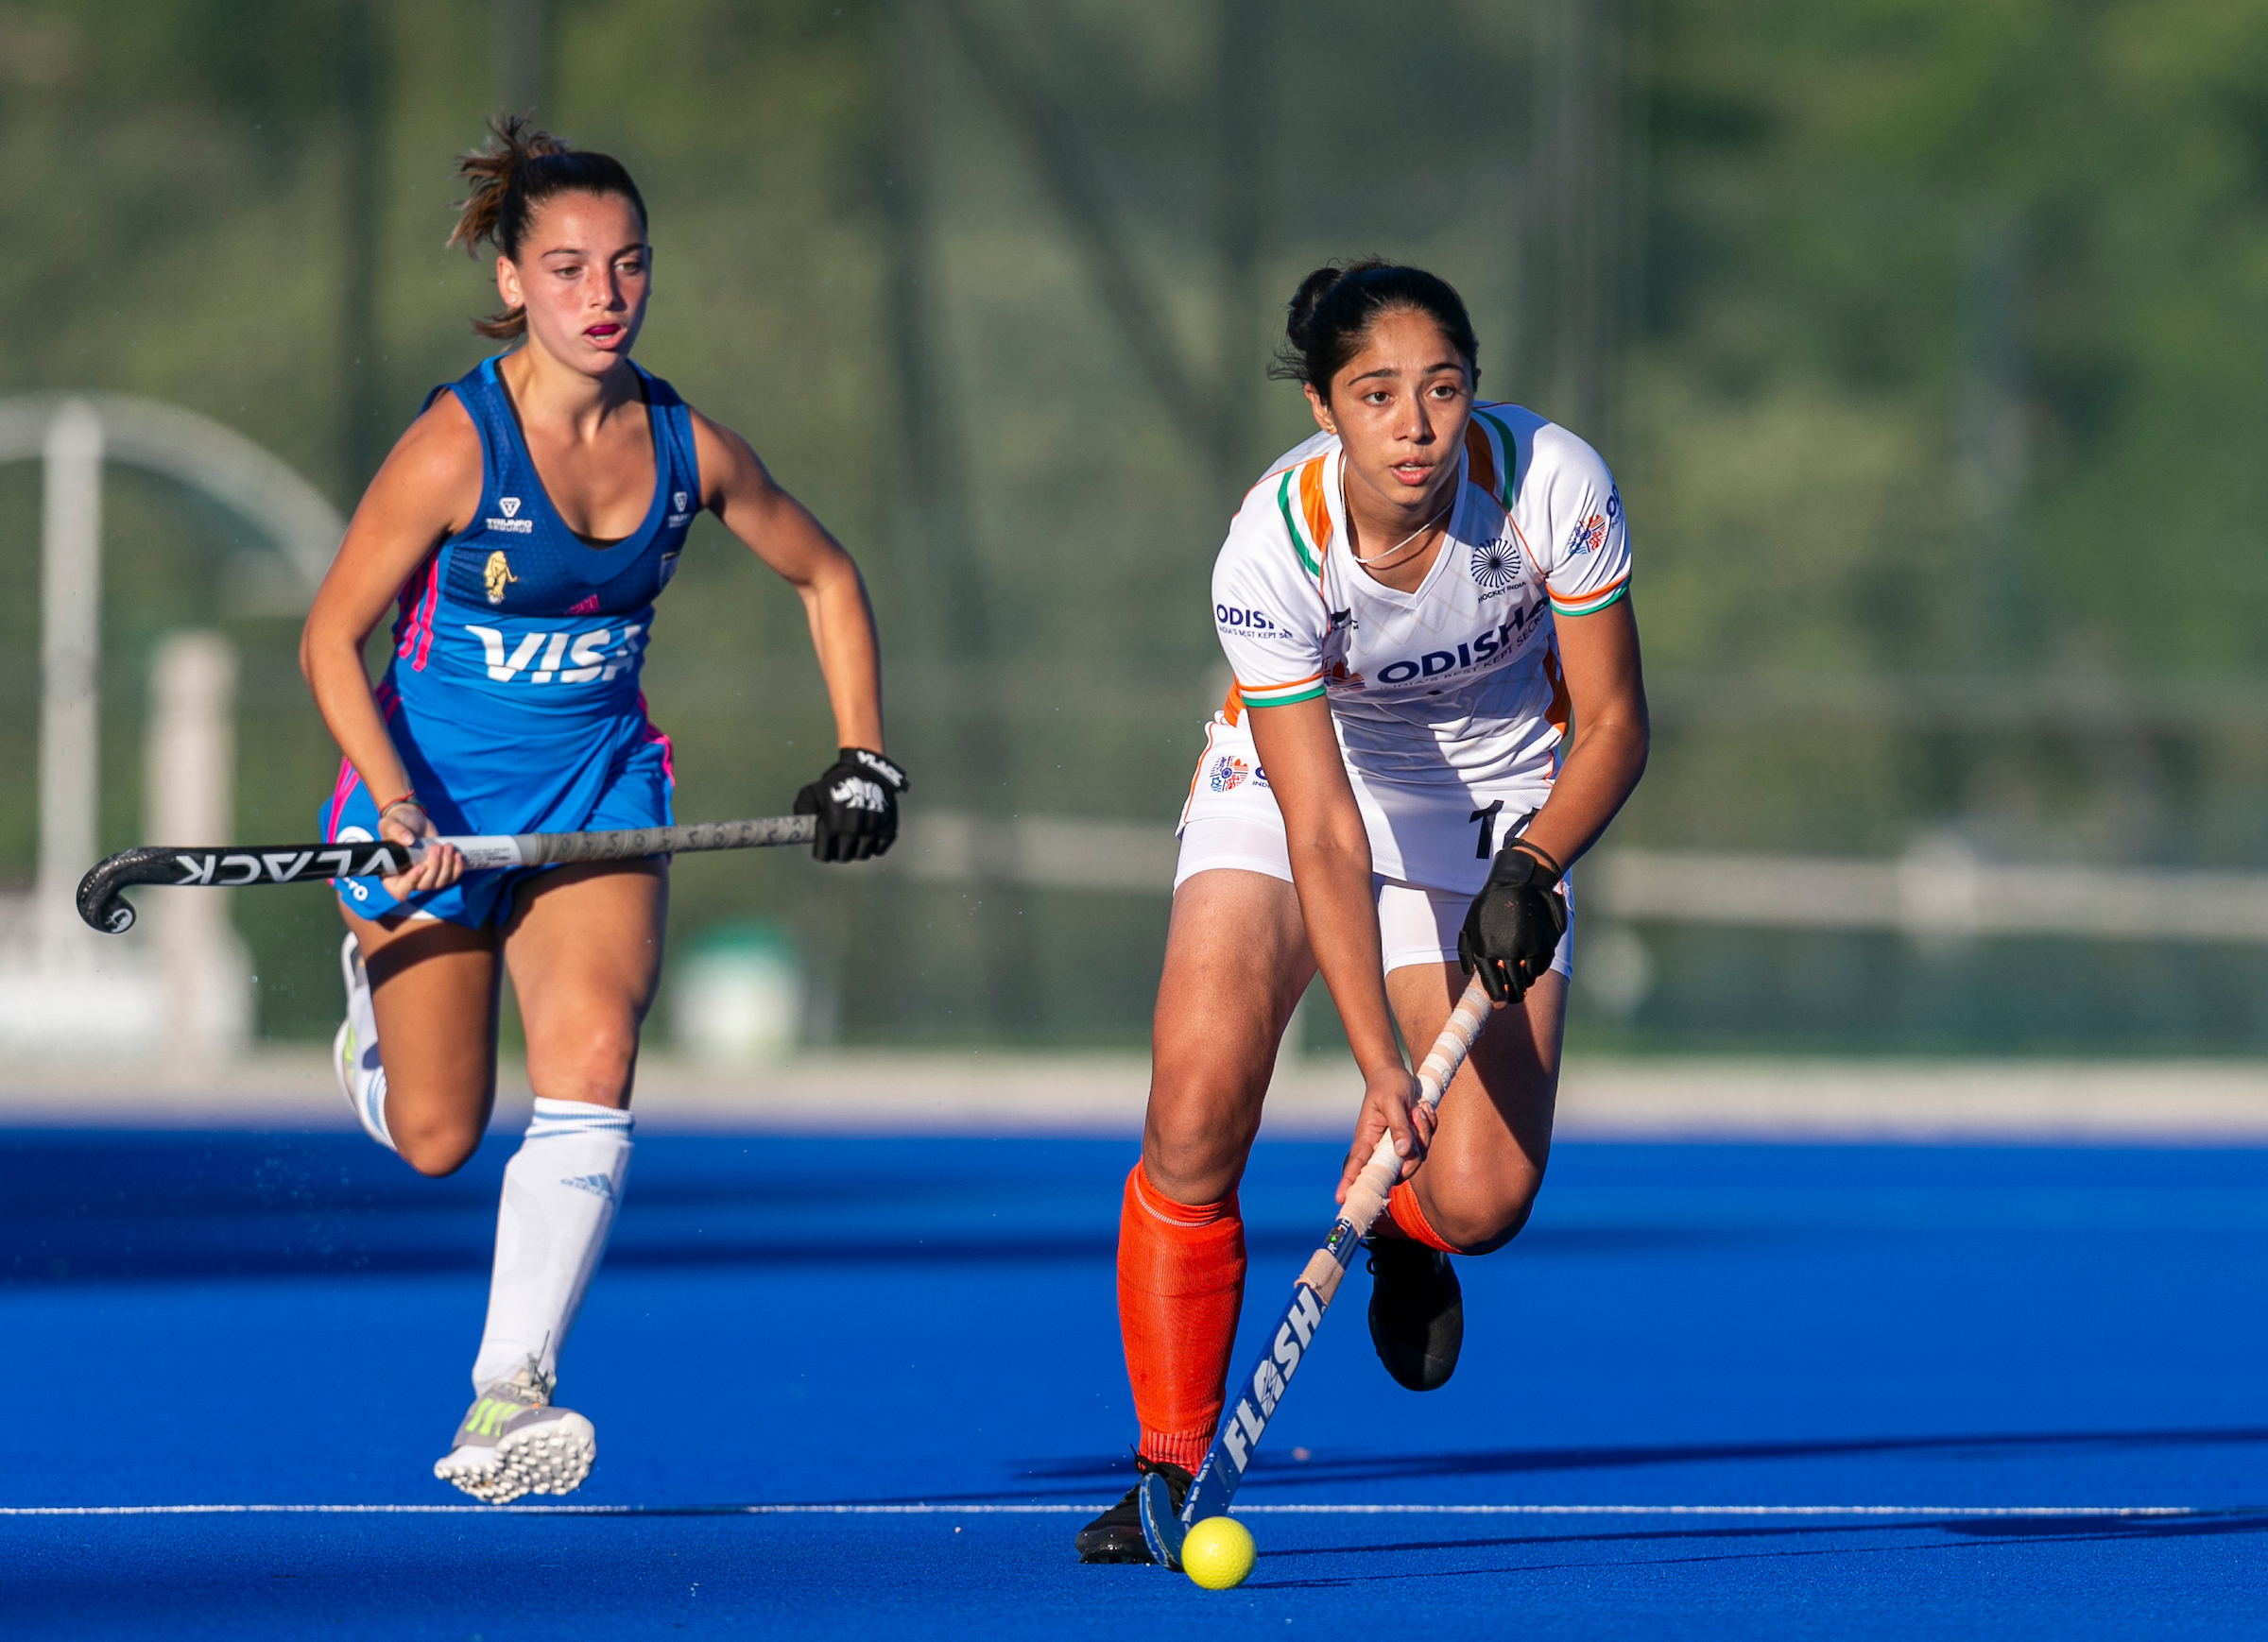 2021 Tokyo Olympics | Debut for India at the Olympics will be a fairytale, asserts Manpreet Kaur